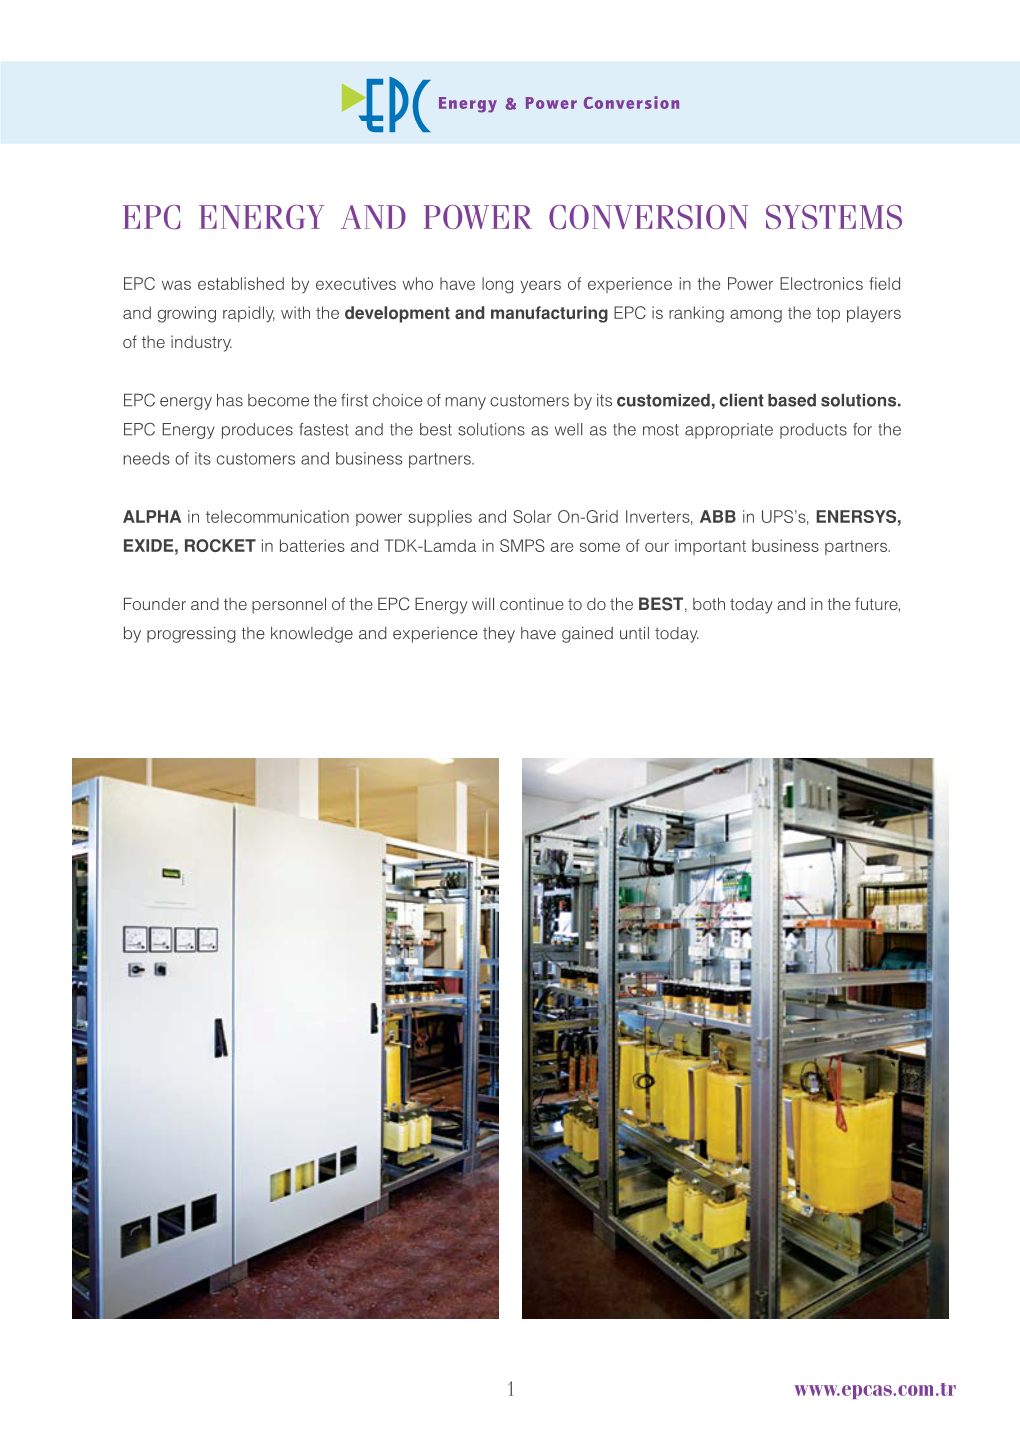 Epc Energy and Power Conversion Systems